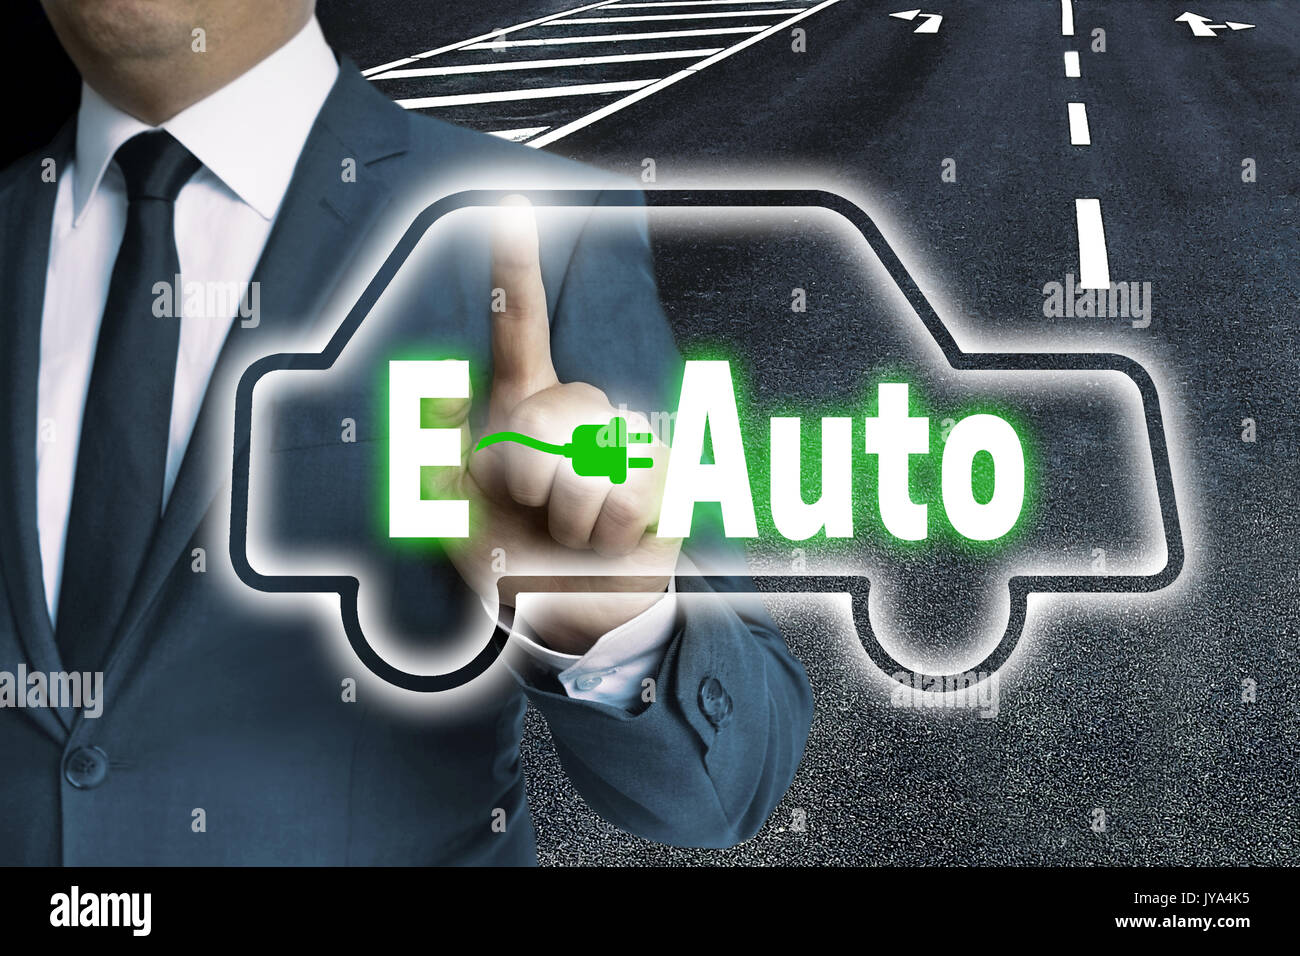 E-Auto touchscreen is operated by man. Stock Photo